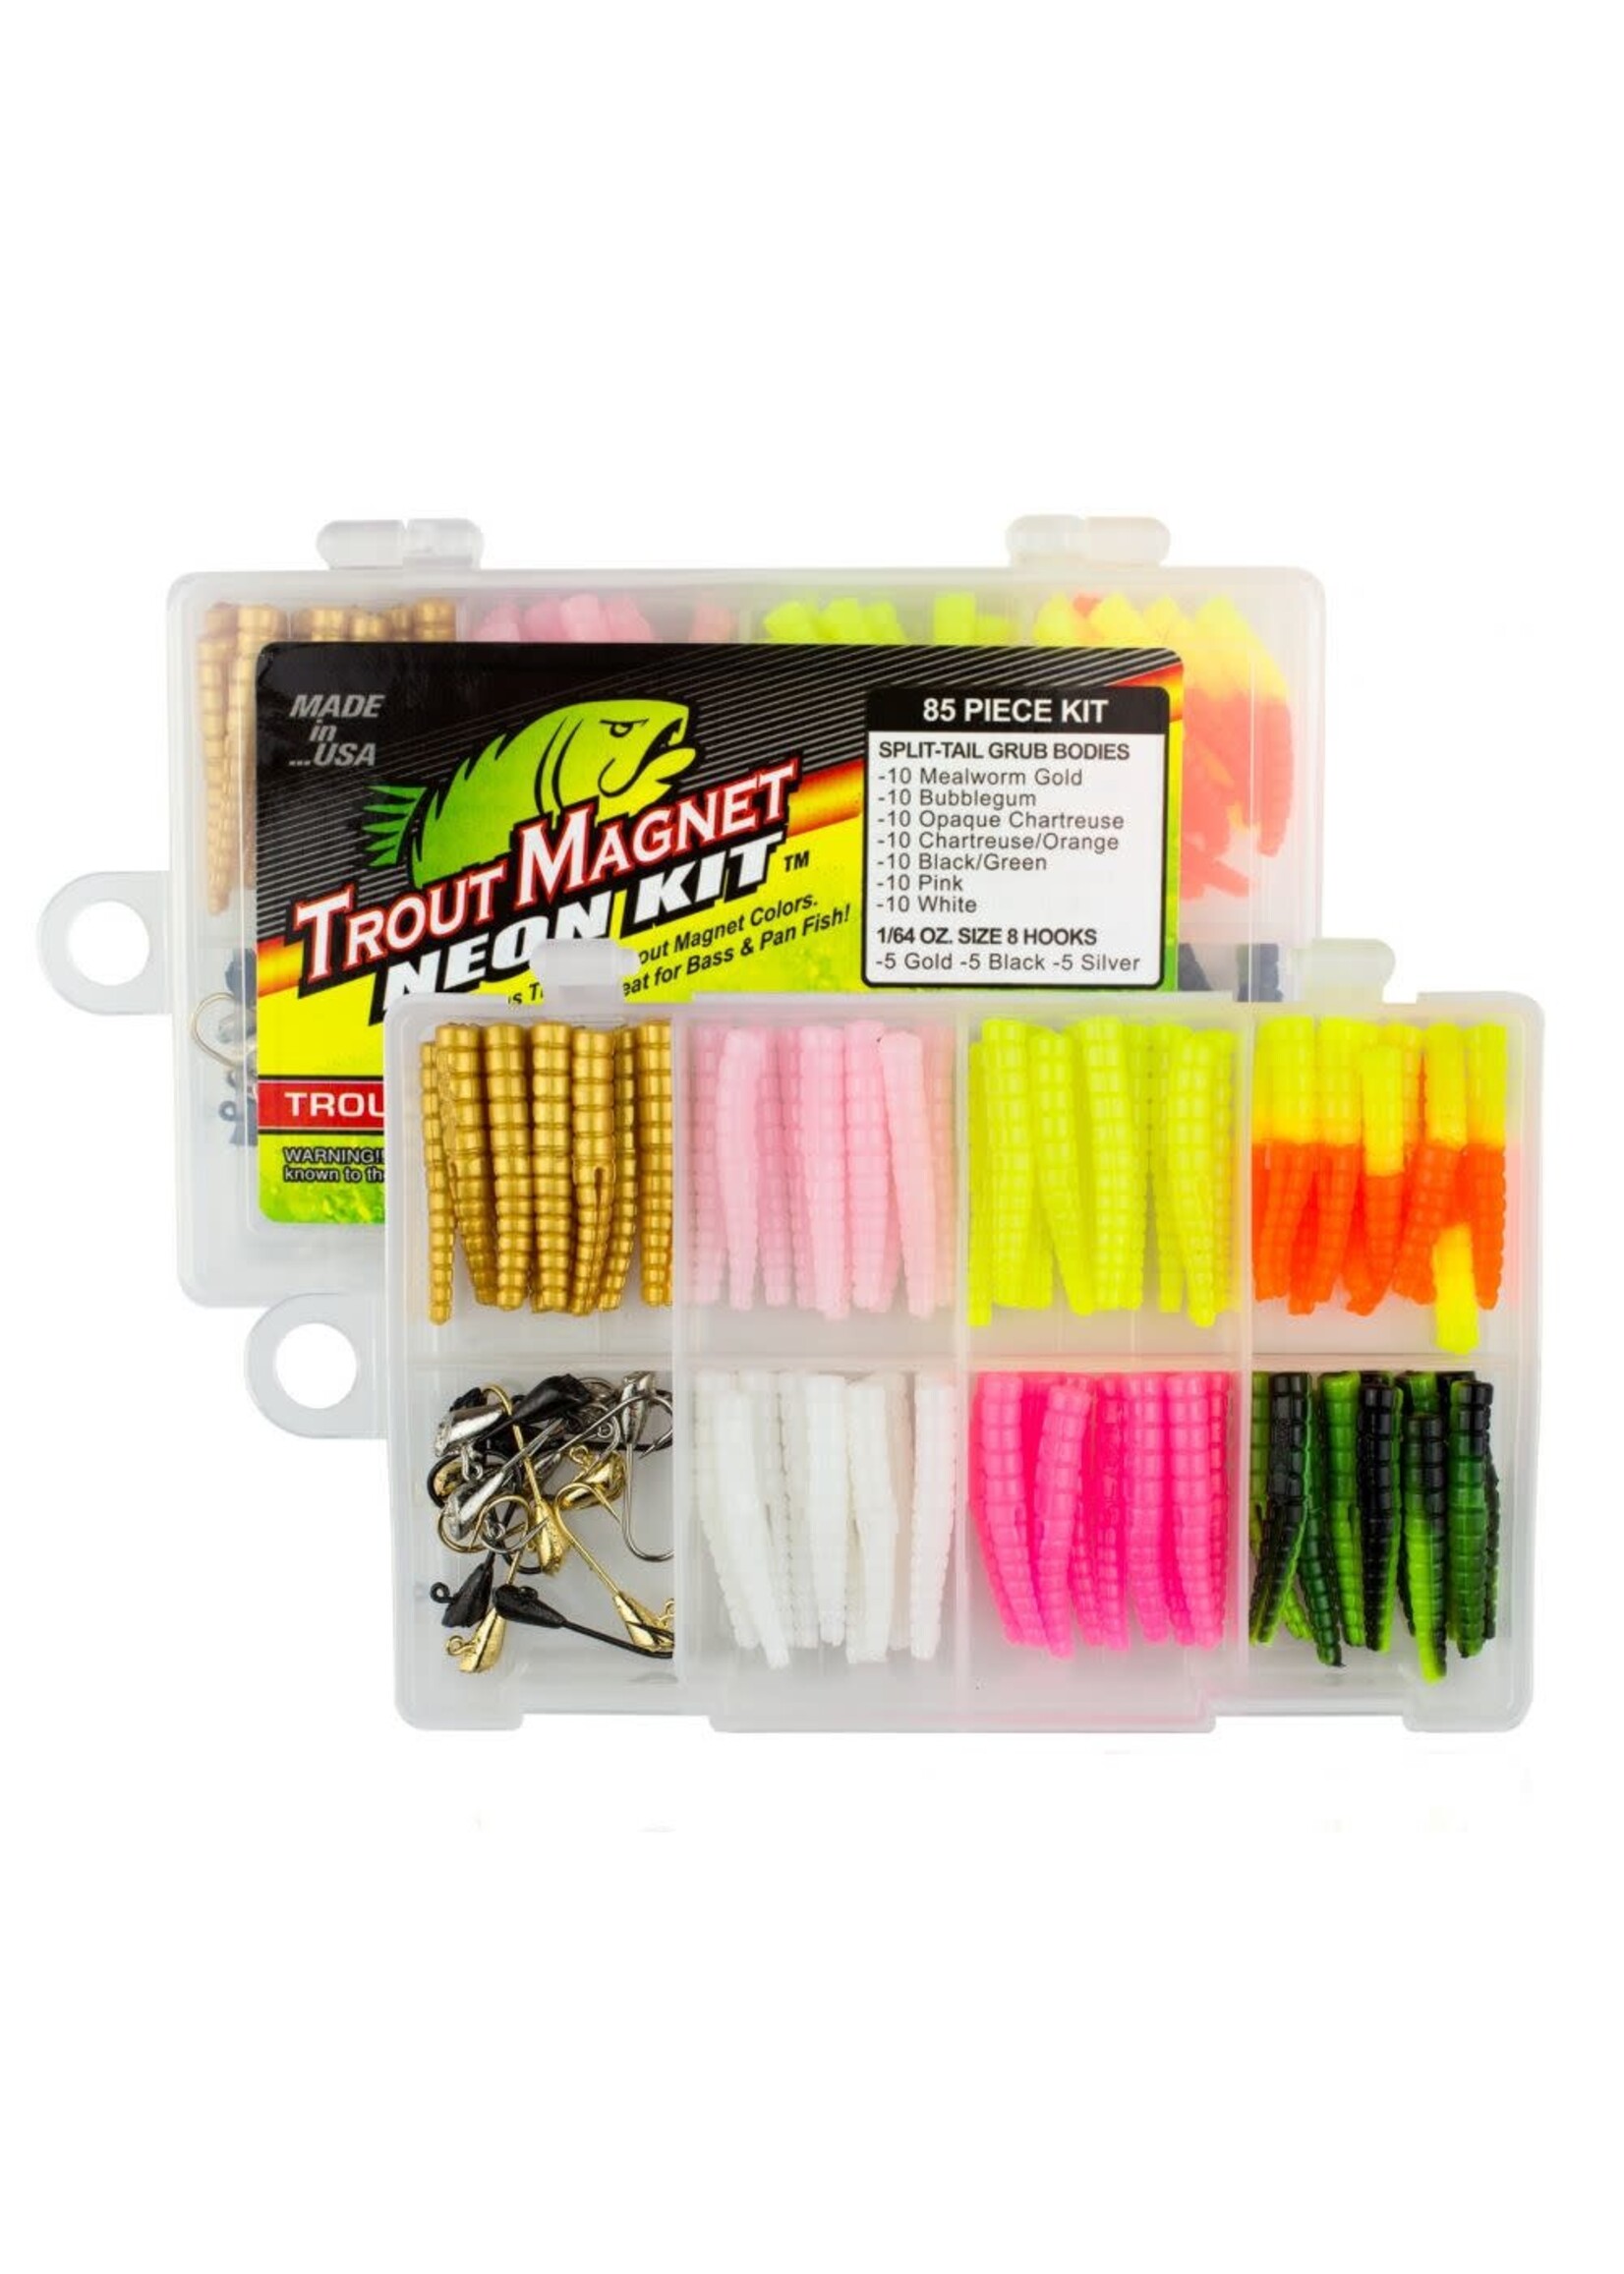  Trout Magnet Ultimate Bundle - 85 Piece Neon Grub Kit, 350 yd  Trout S.O.S. Spool, 100% Fluorocarbon Phantom Leader Line, and 4 E-Z Trout  Floats : Sports & Outdoors